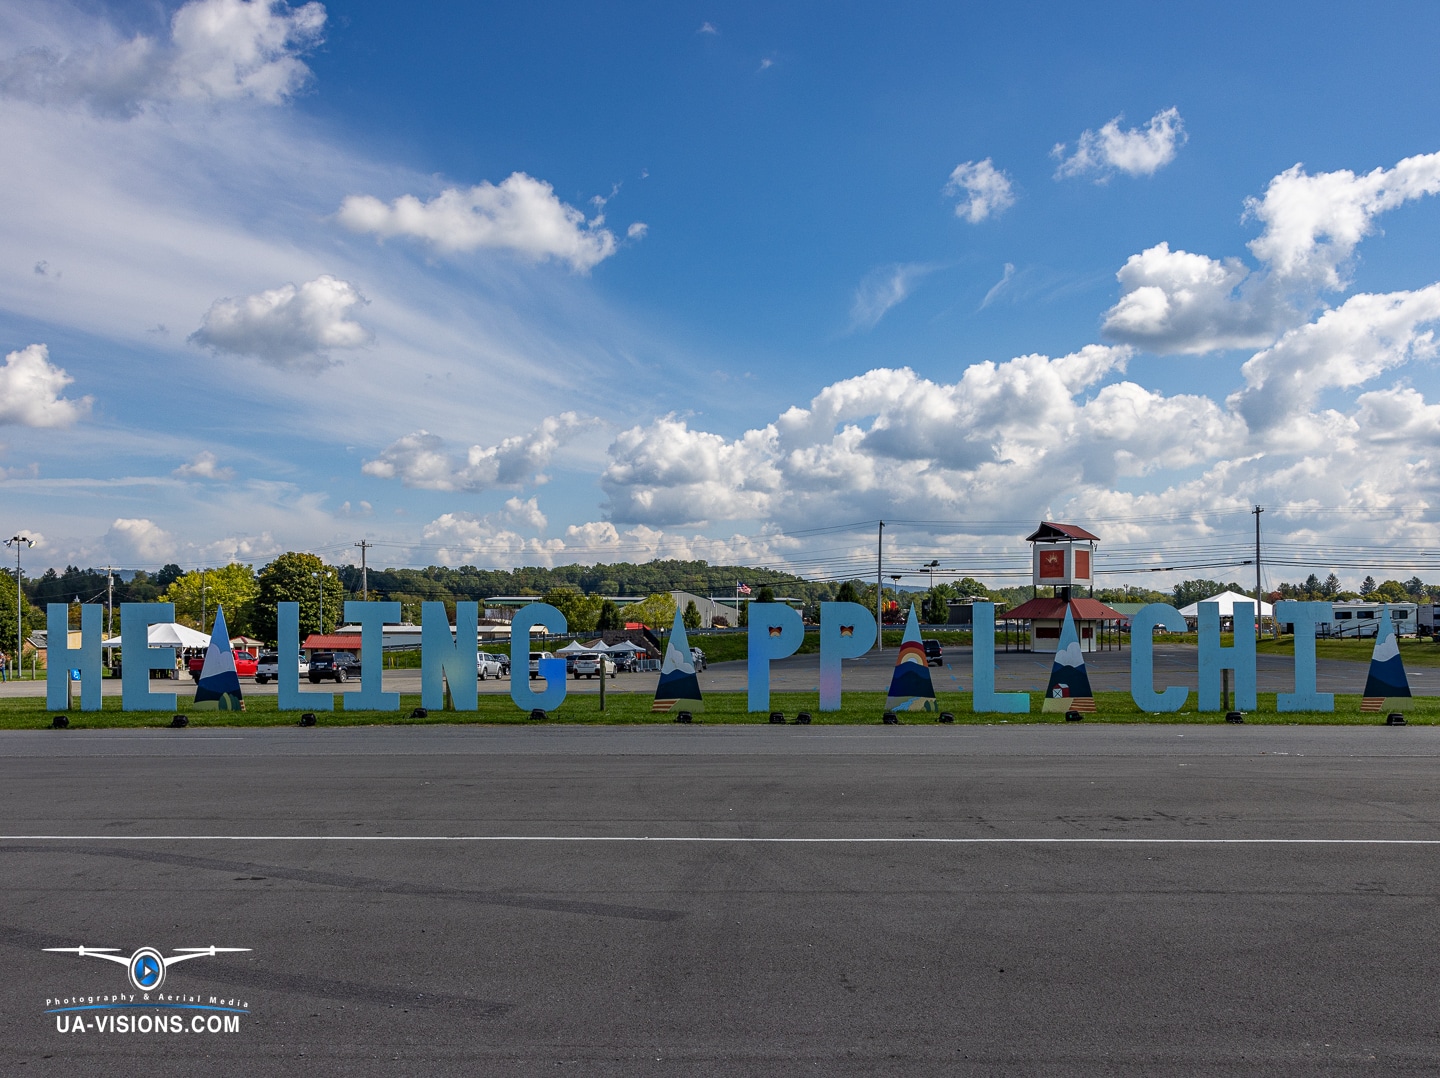 The 'Healing Appalachia' sign stands bold and bright against a blue sky in Lewisburg, WV.